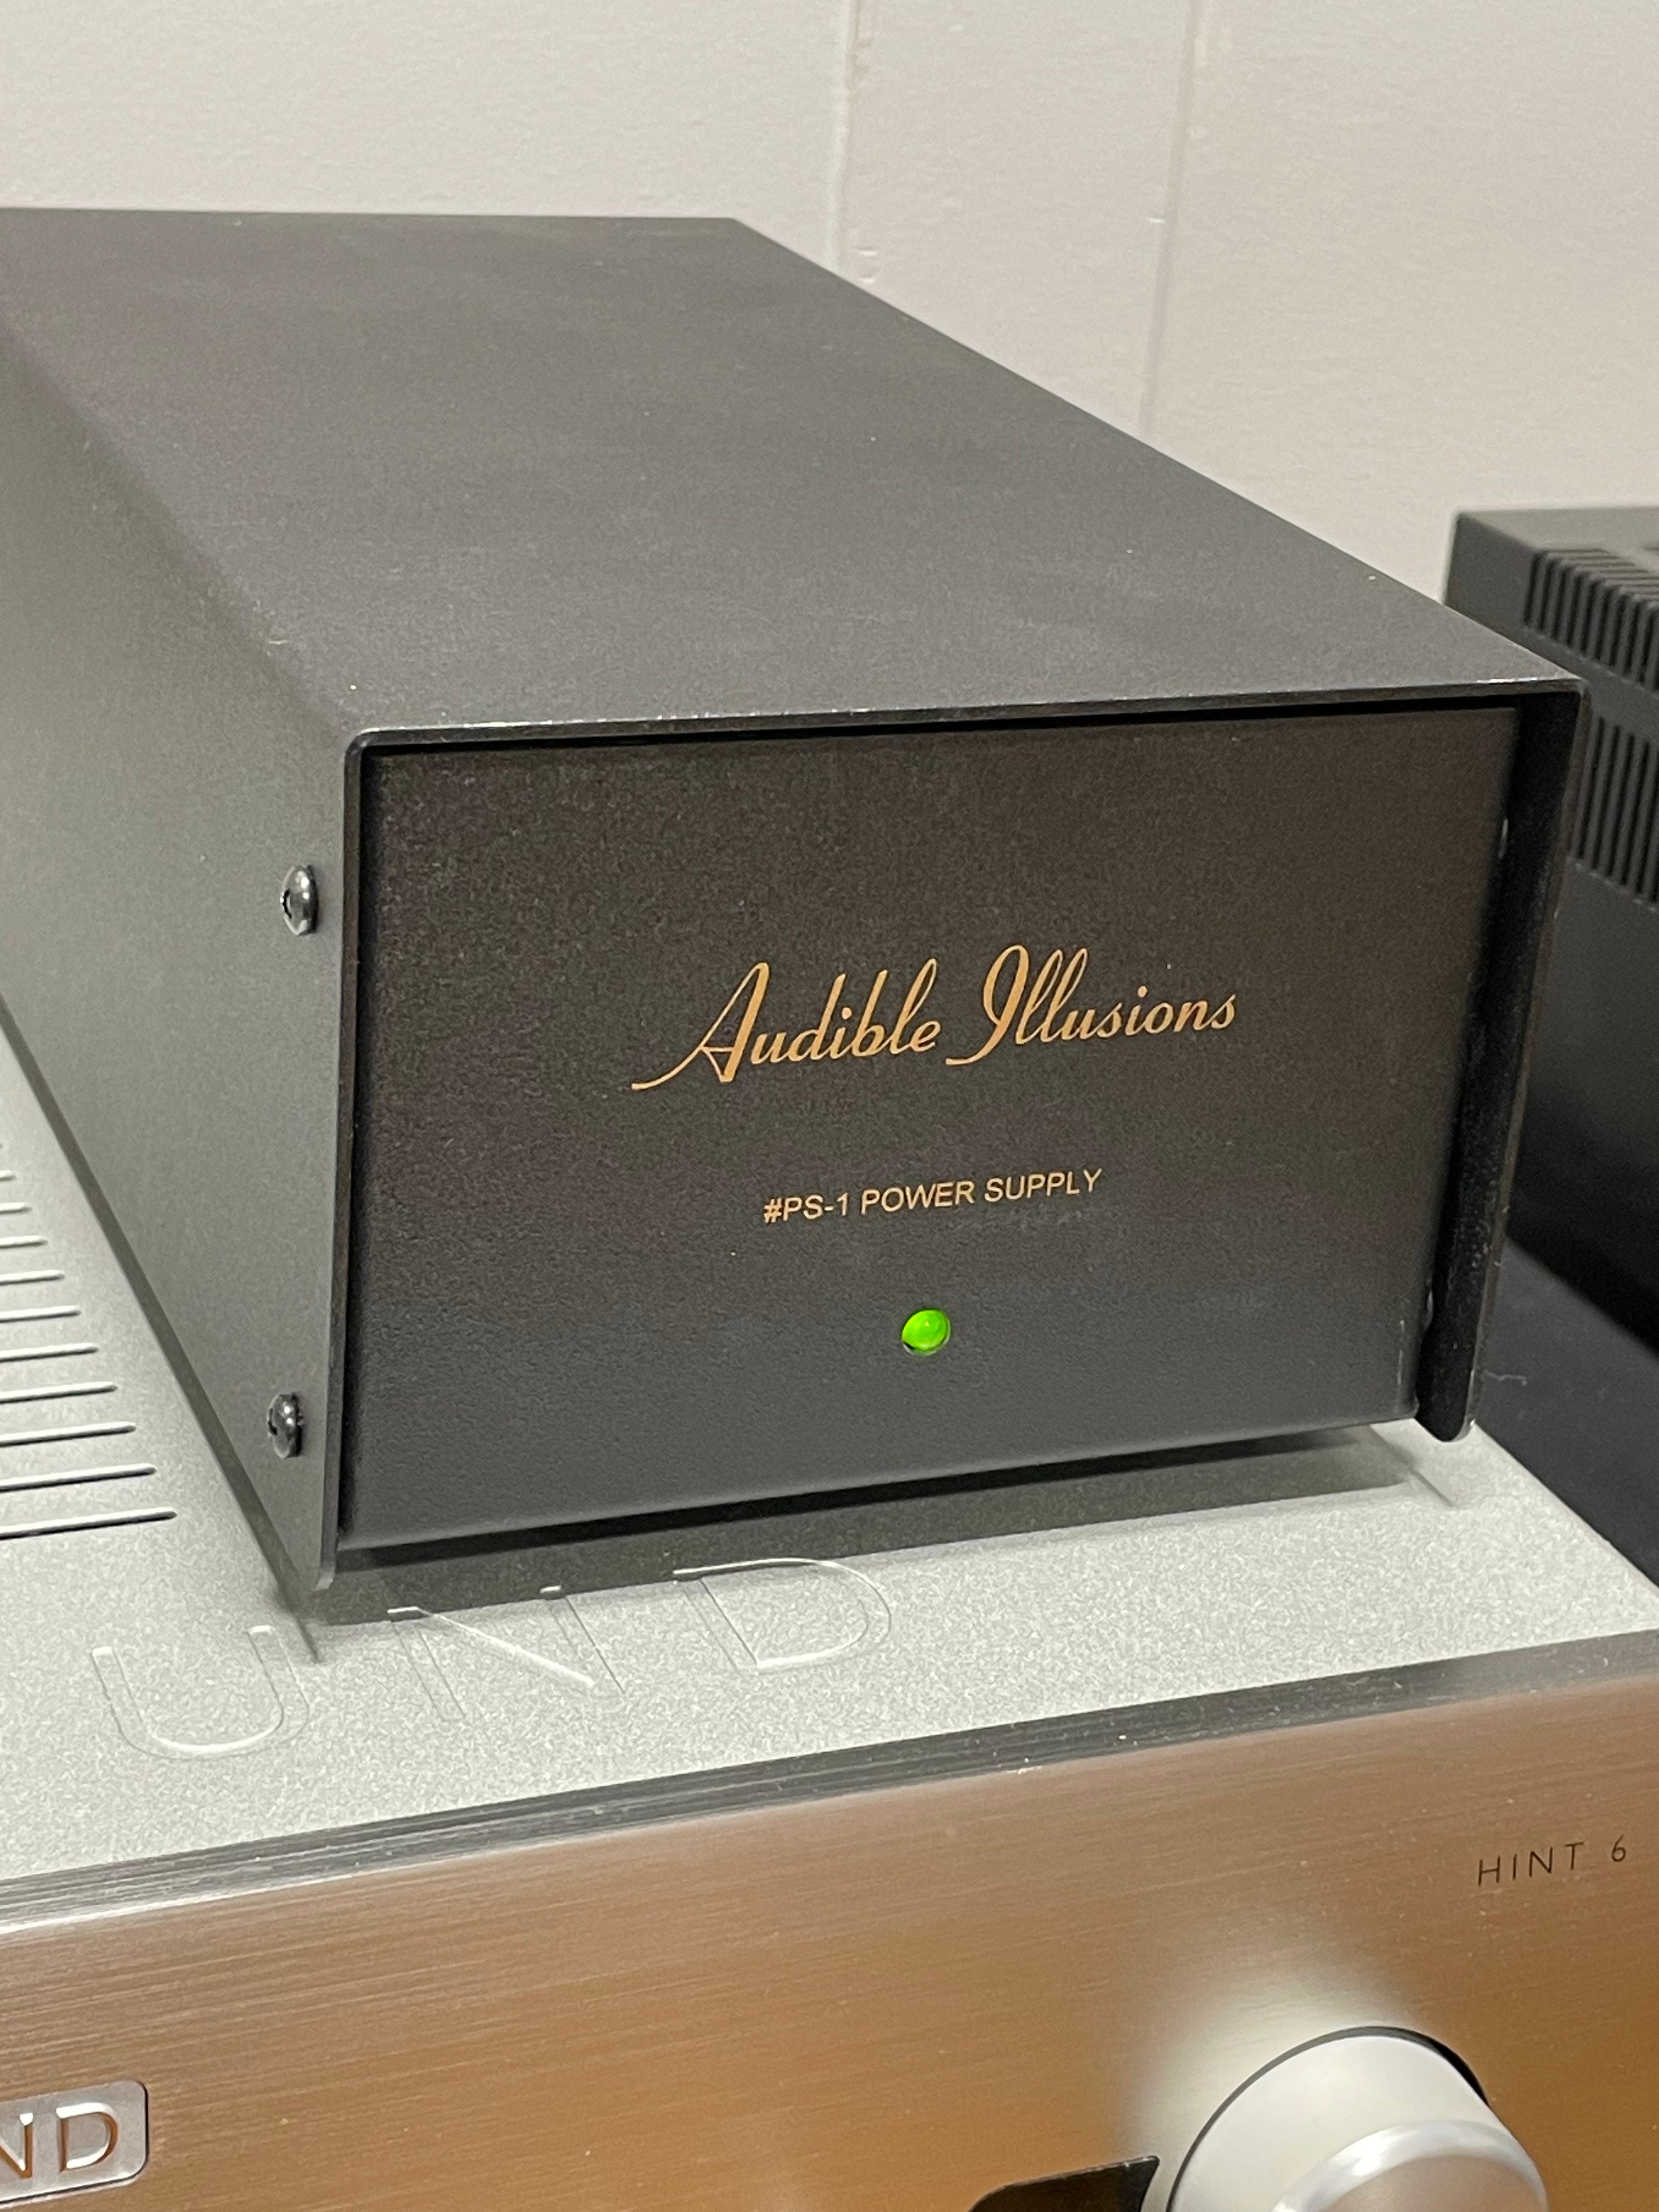 Audible Illusions, Modulus 3A Preamp w/PS 1 Offboard Power Supply & MM Phono Stage - Iconic Preamp